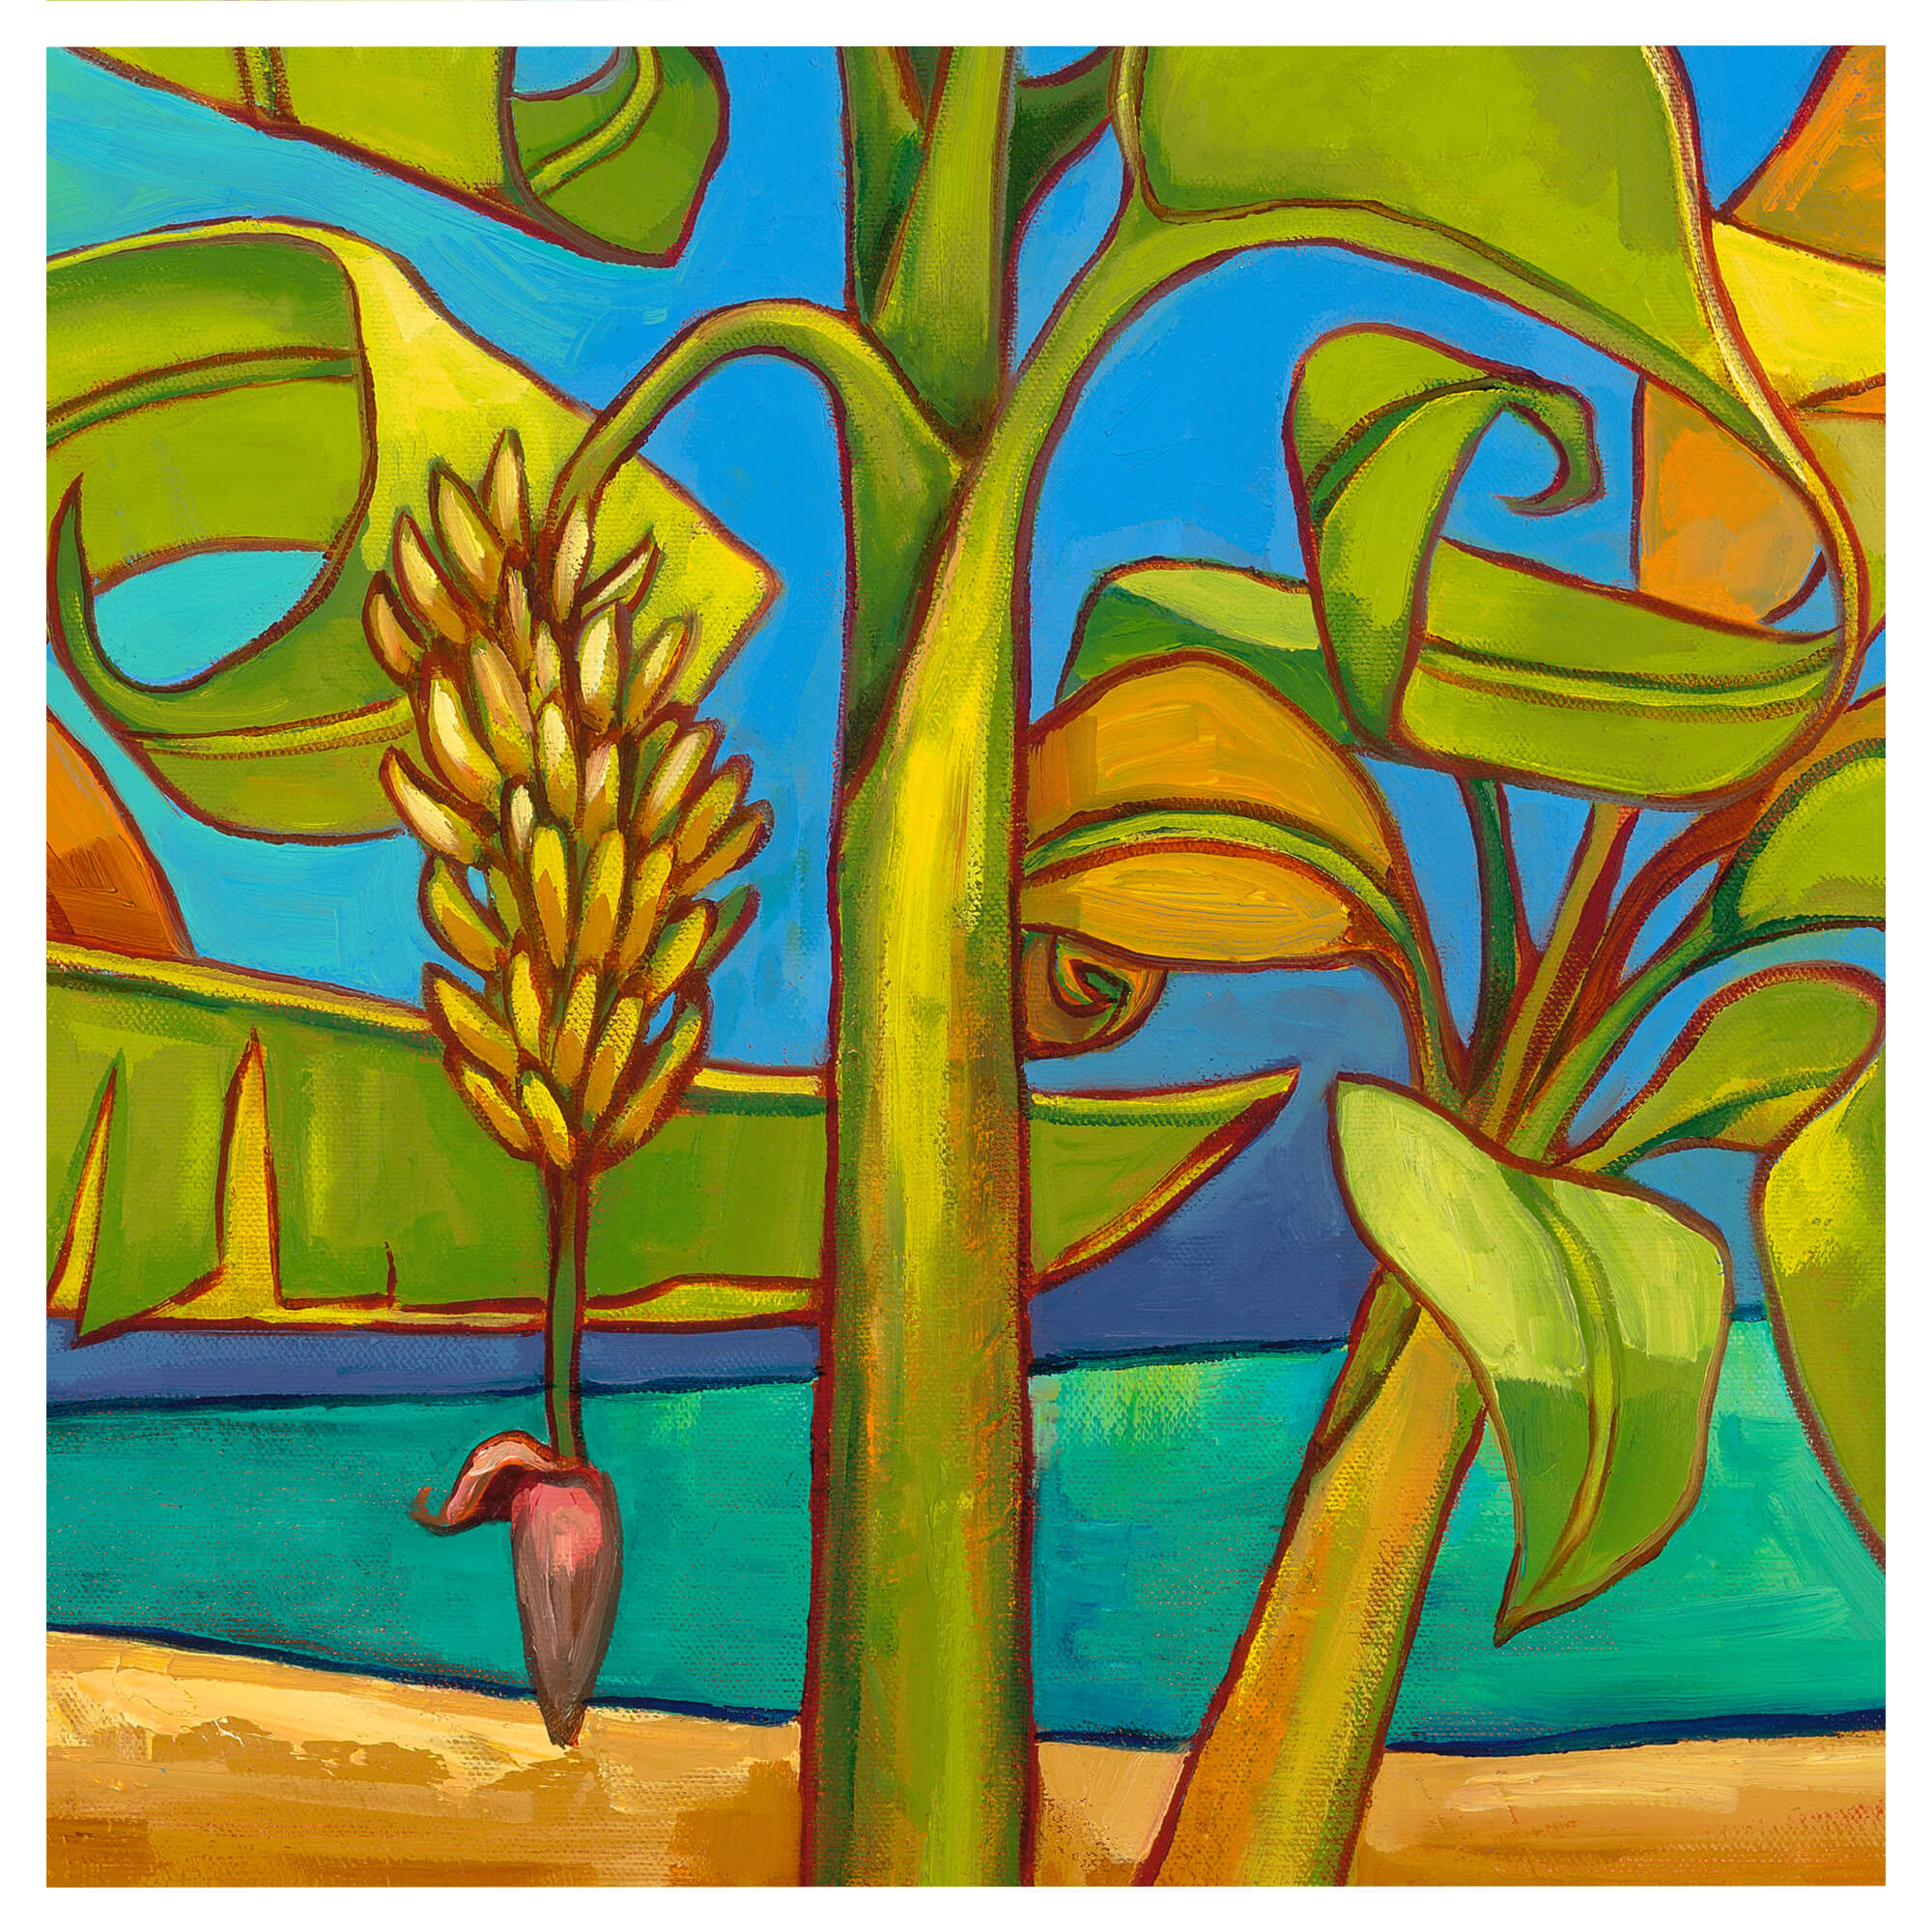 Banana tree trunk and fruit by Hawaii artist Colin Redican